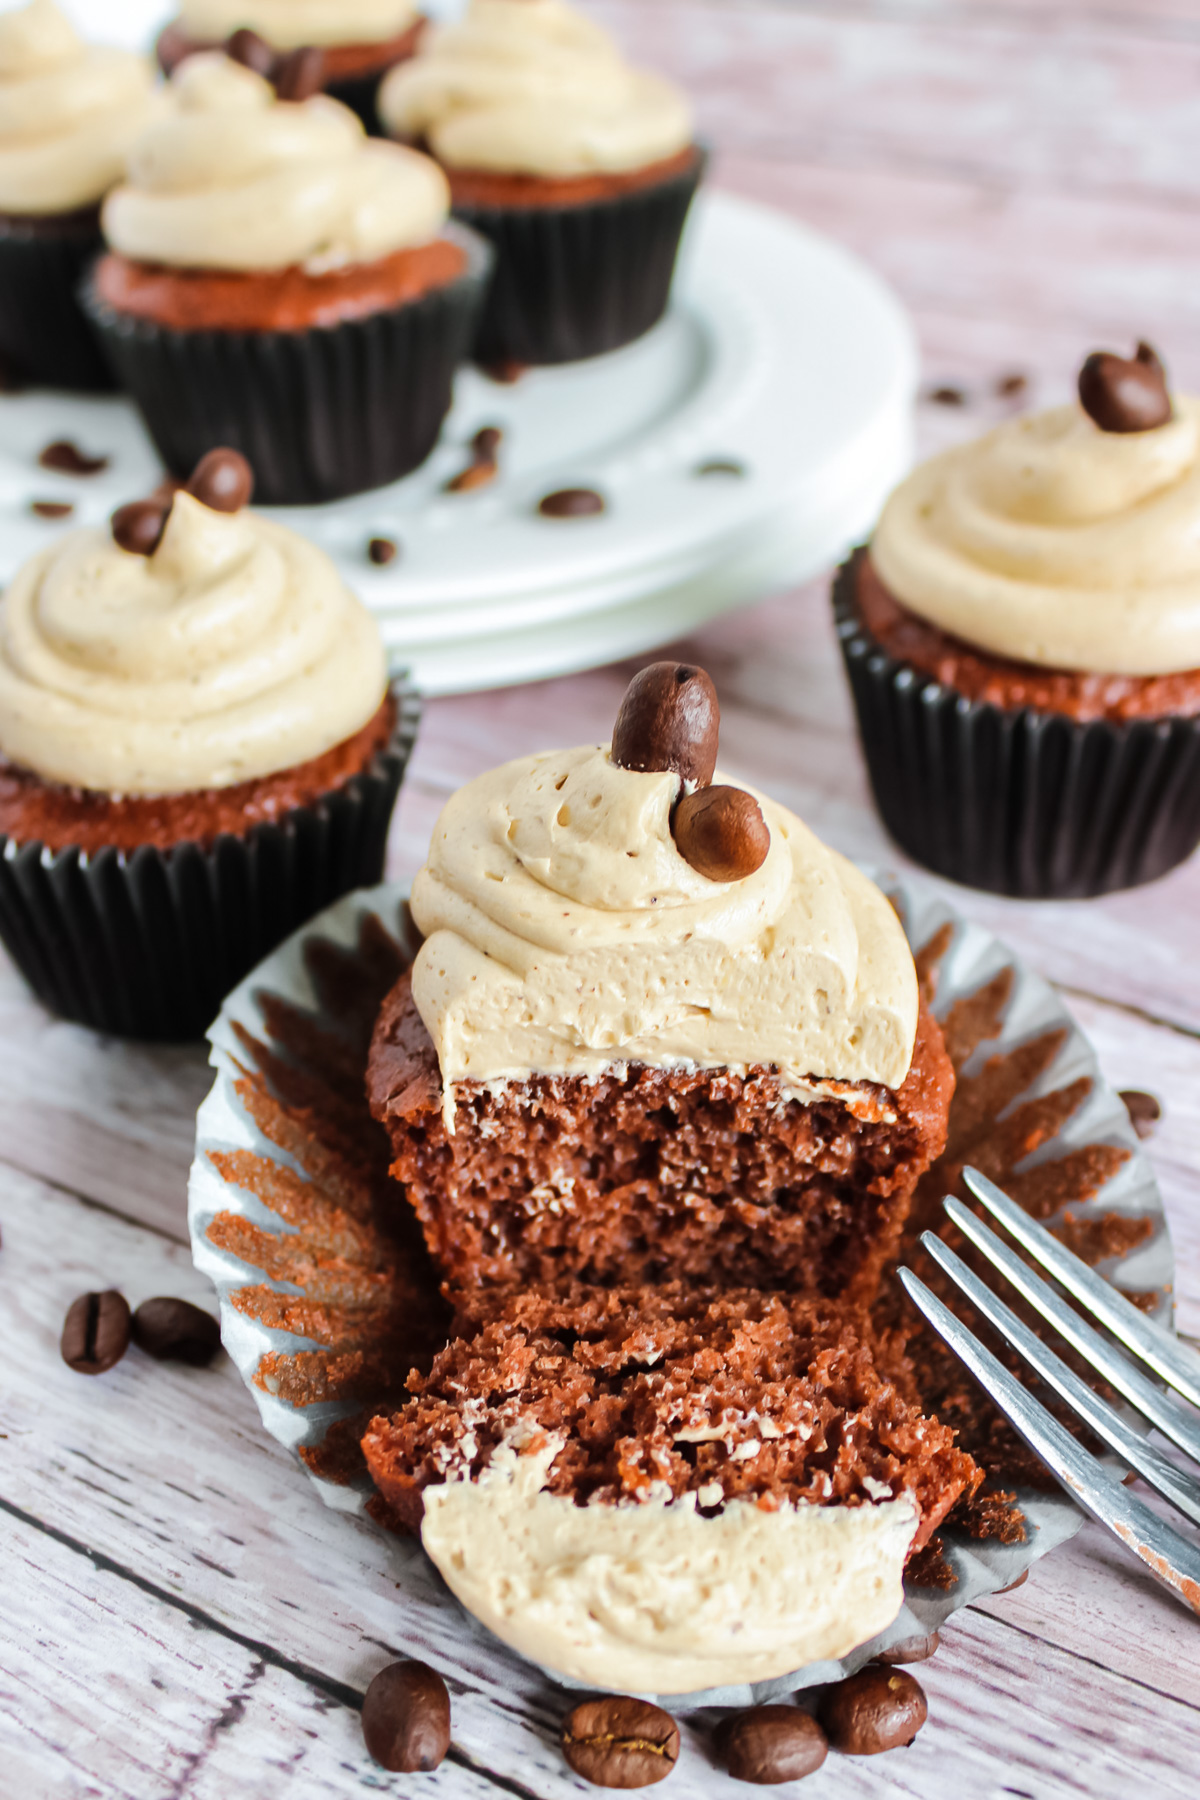 A chocolate cupcake frosted with the best coffee buttercream frosting. The cupcake is cut in half showing the texture of the piped frosting as well as the crumb texture of the cupcake.